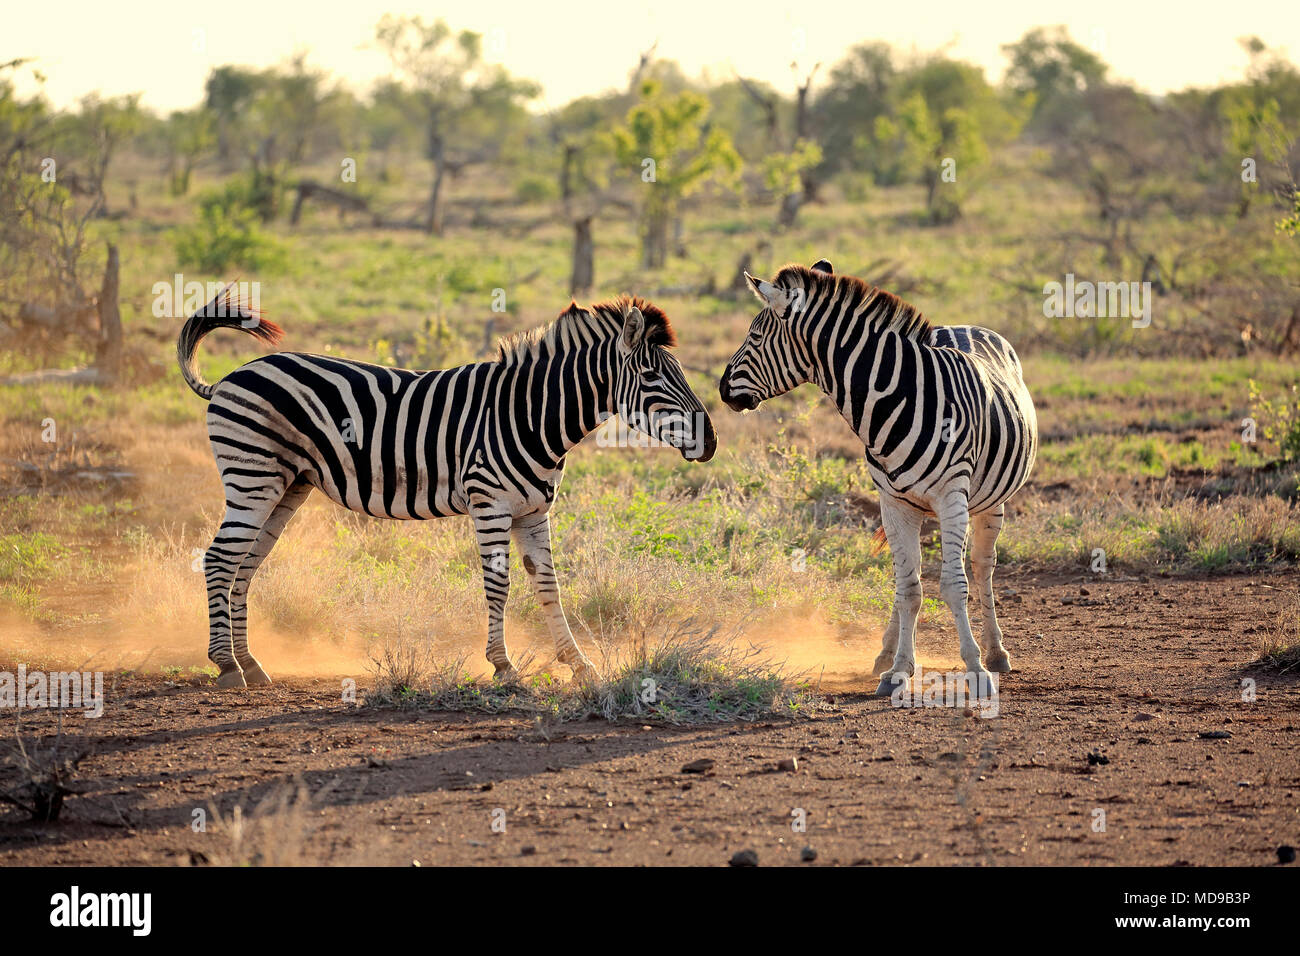 Burchell's Zebras (Equus quagga burchelli), adult, two males fighting, social behavior, Kruger National Park, South Africa Stock Photo